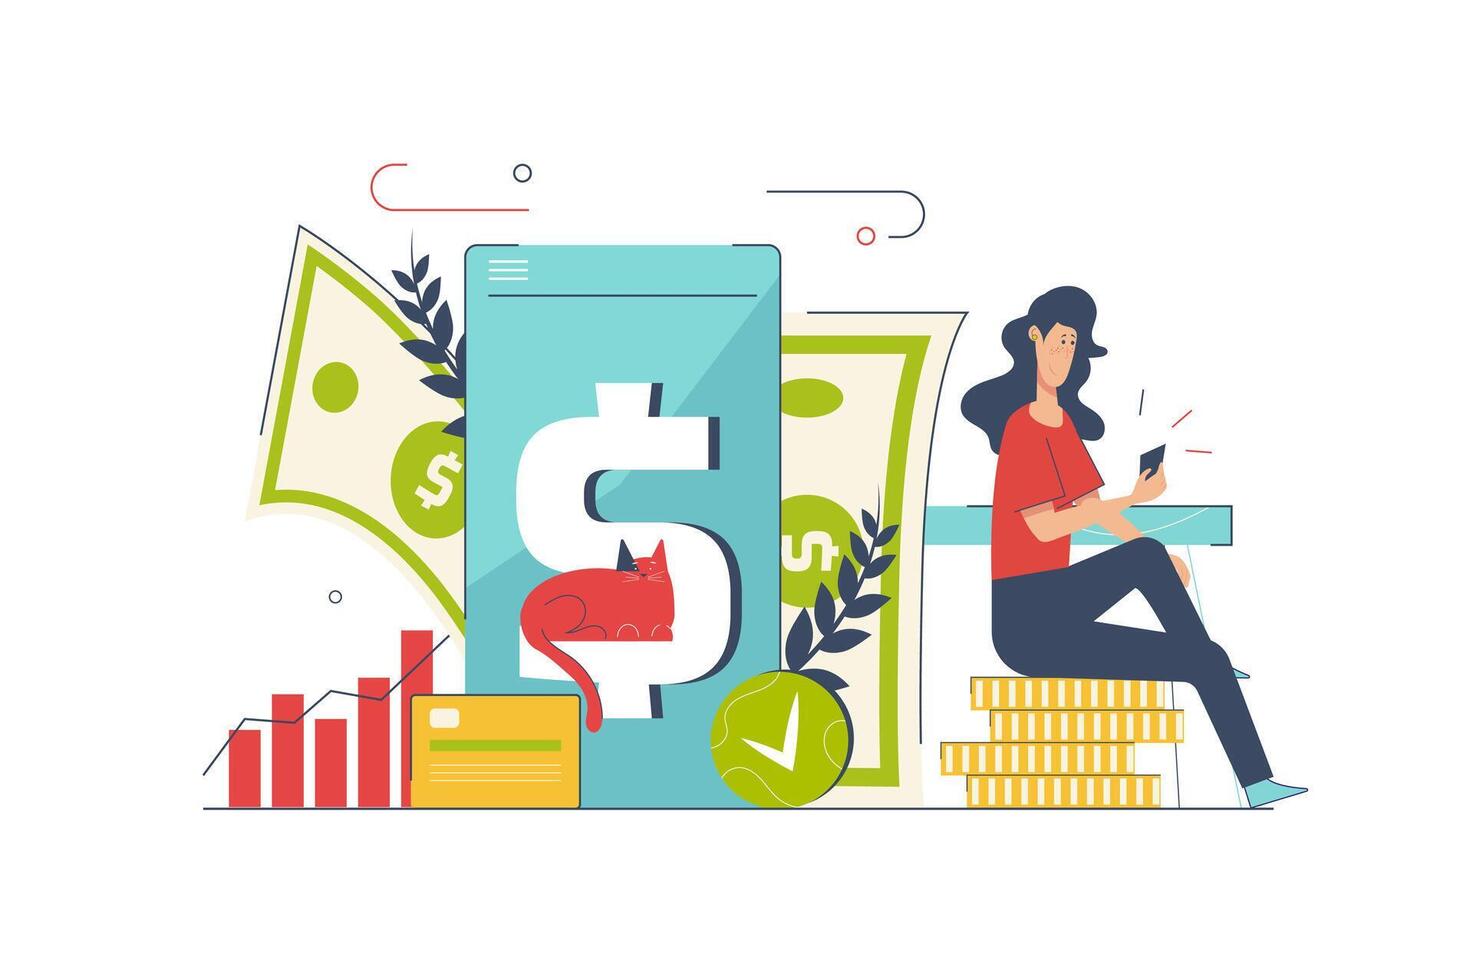 Business investment concept with people scene in flat cartoon design. Woman making success strategy for investing money in company for profit. illustration with character situation for web vector